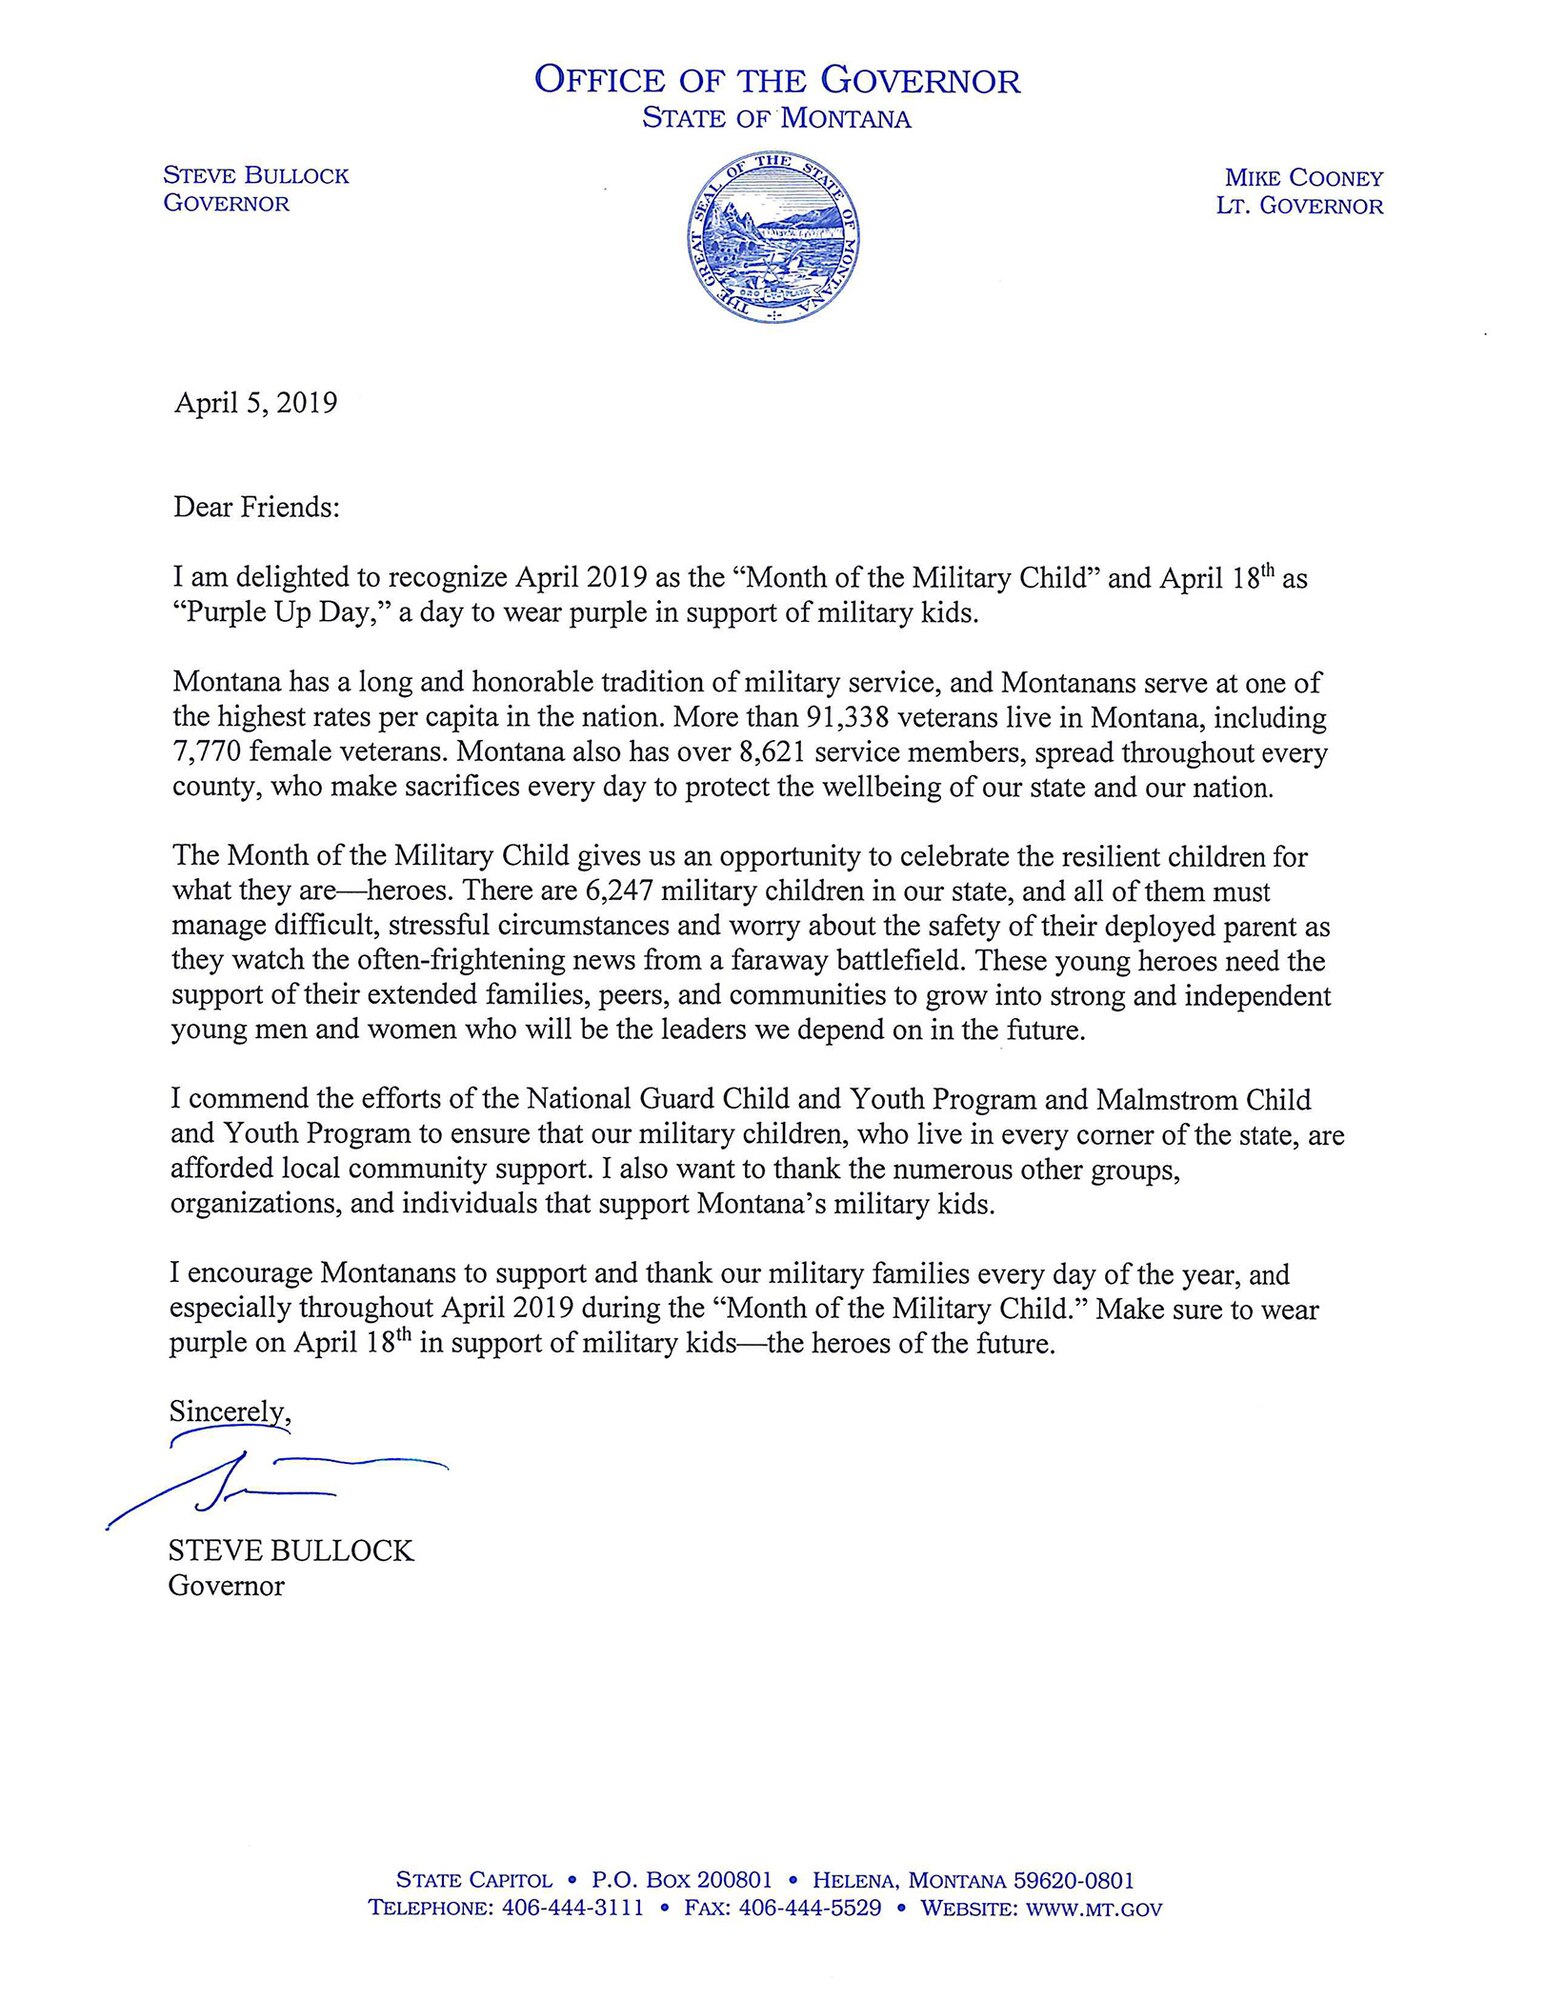 Montana Governor Steve Bullock's letter signed April 5, 2019 recognizes April 2019 as the Month of the Military Child; and April 18 as "Purple Up Day" to wear purple in support of military children.